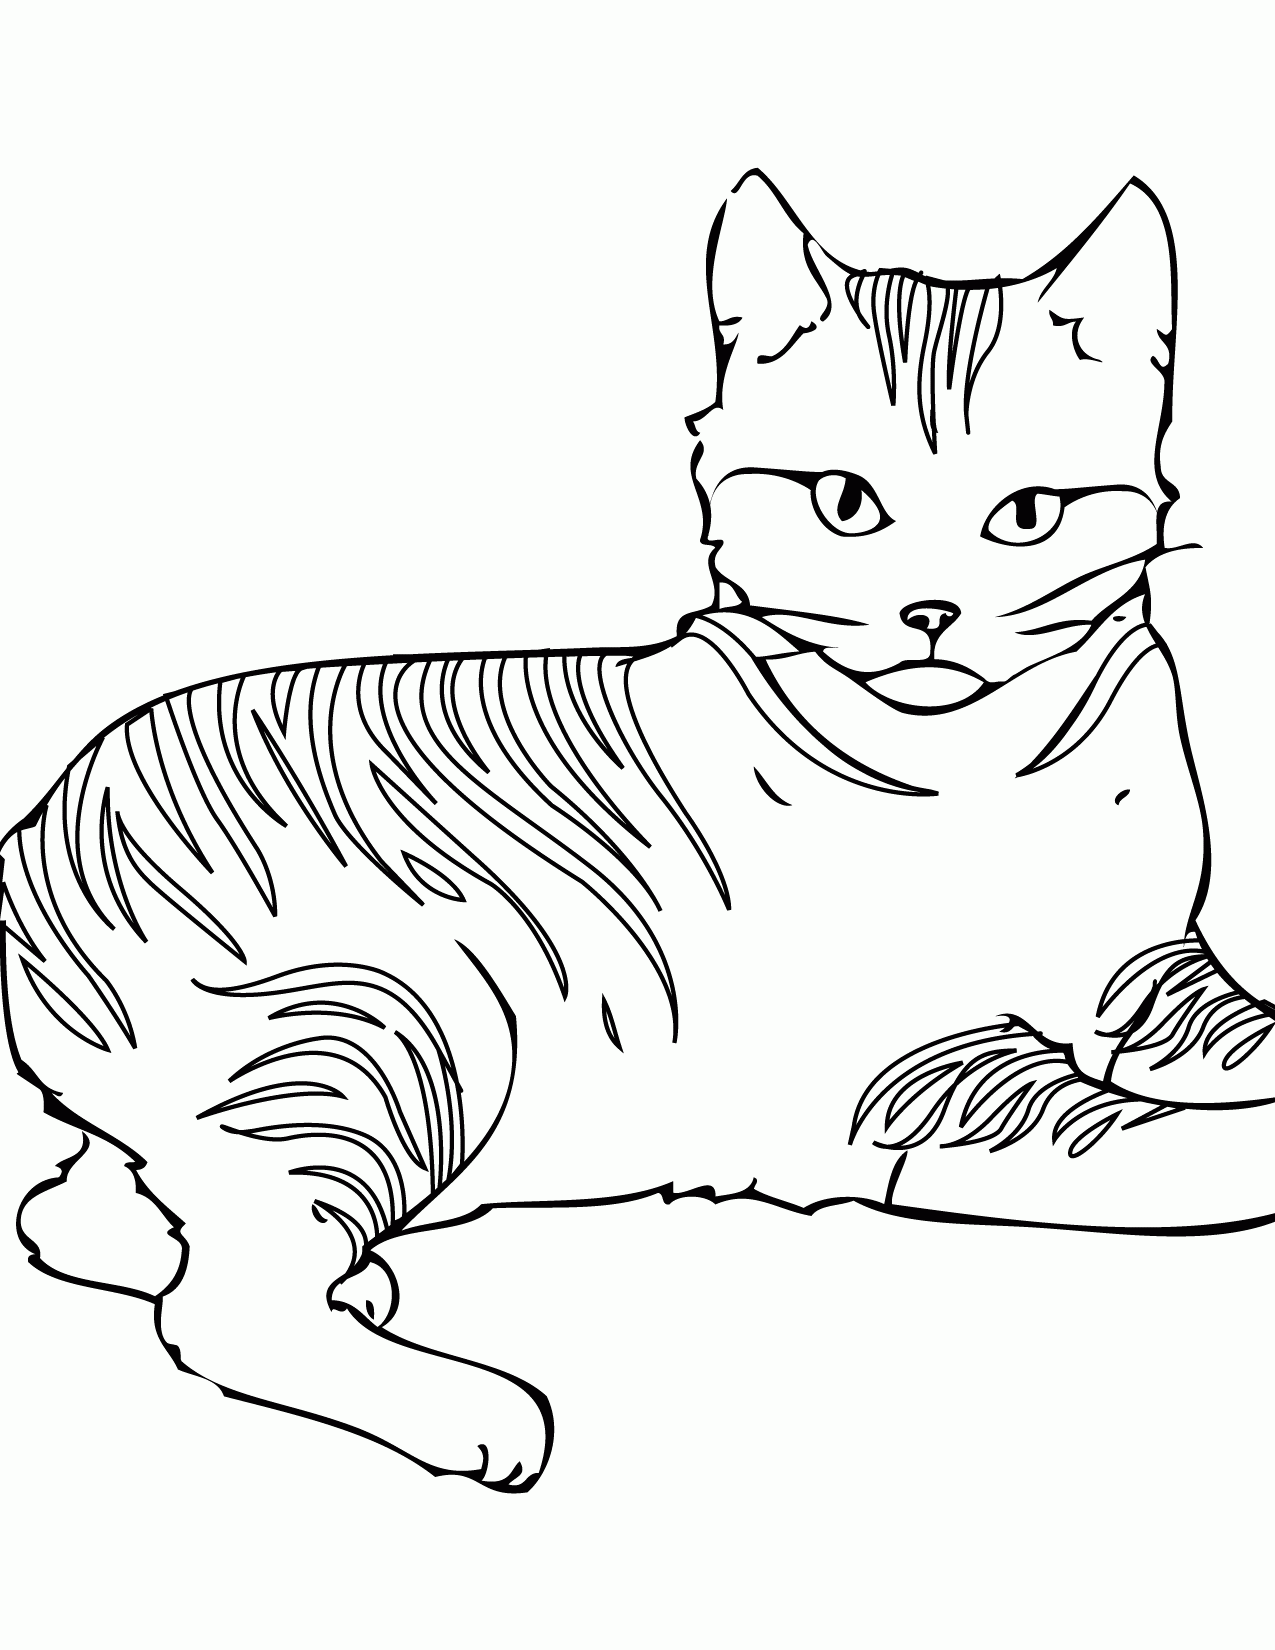 Download Warrior Cats Coloring Page - Coloring Home